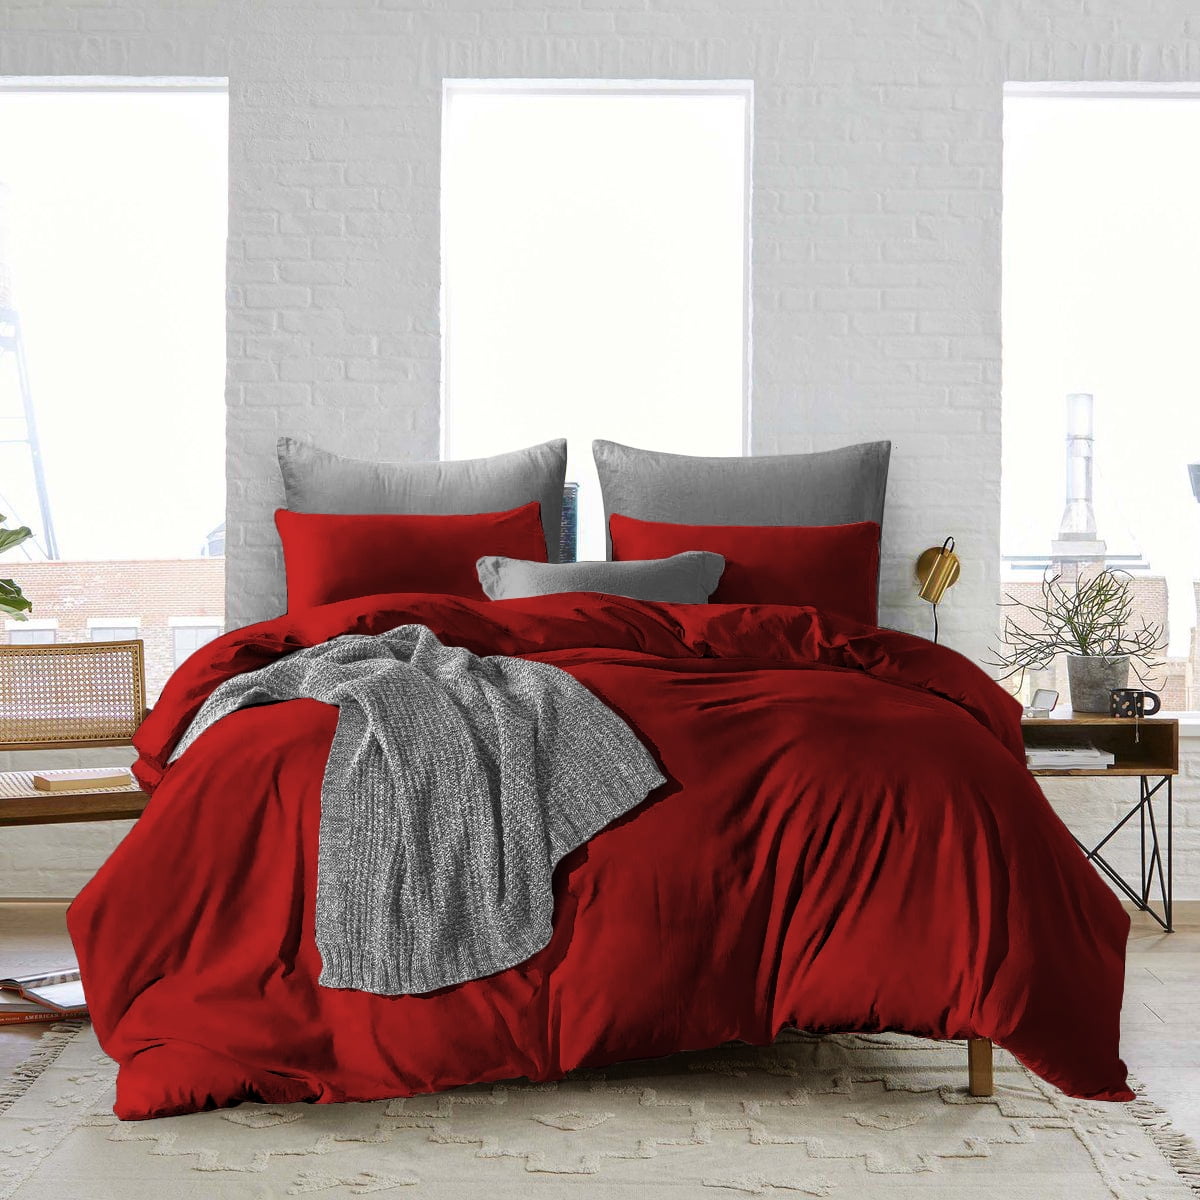 RED SOLID US SIZES SHEET SET/DUVET/FITTED/FLAT 1000 THREAD COUNT EGYPTIAN COTTON 